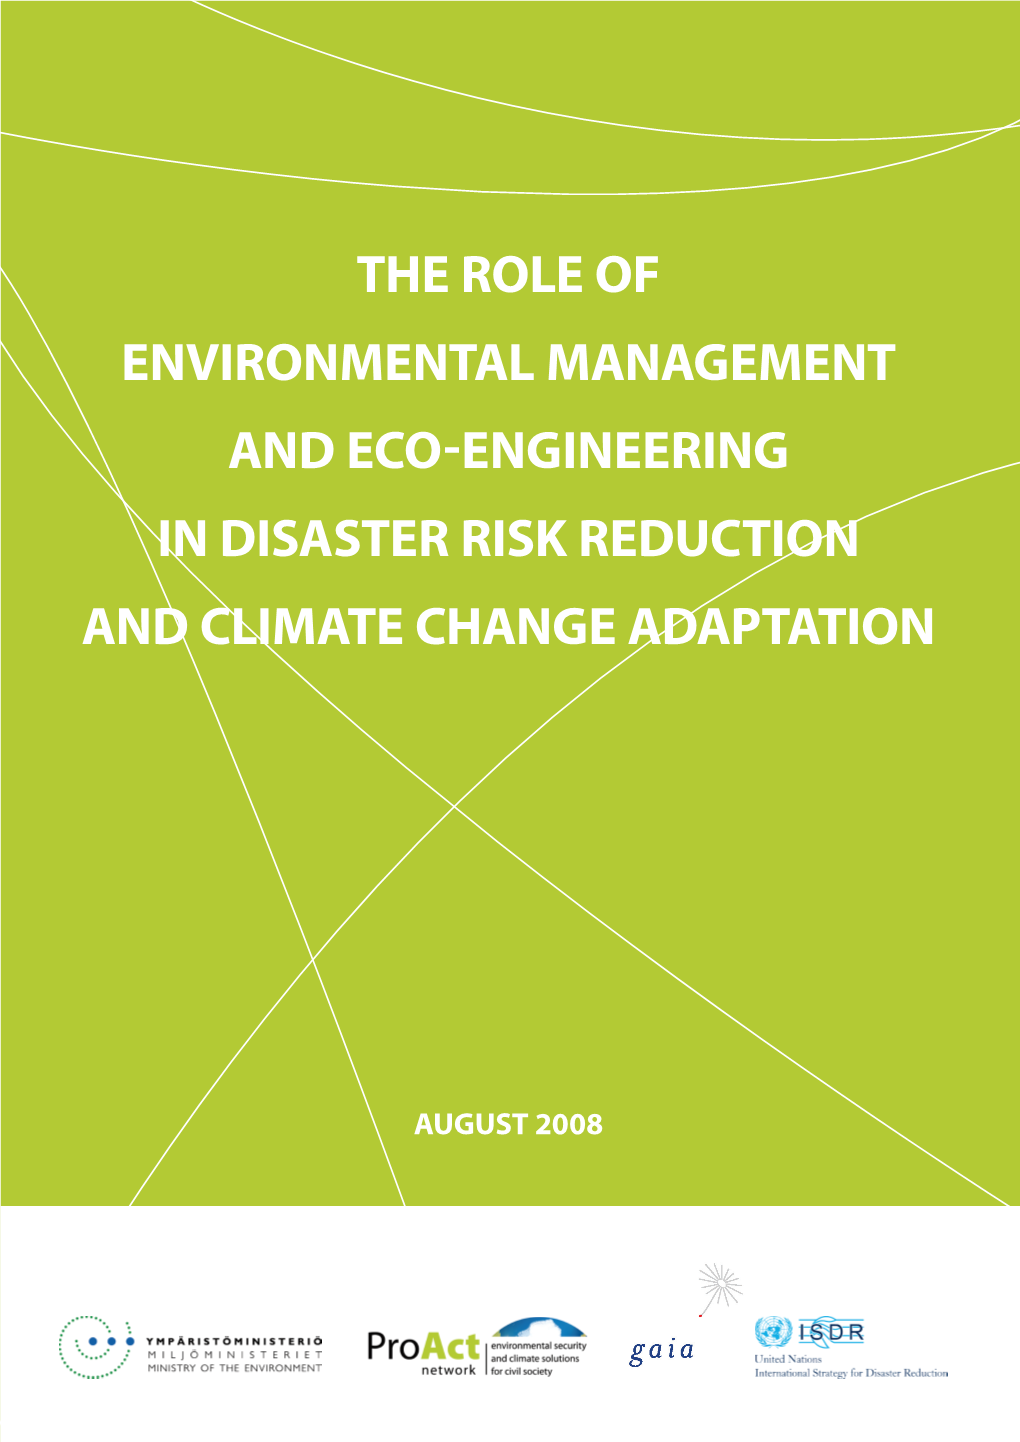 The Role of Environmental Management and Eco-Engineering in Disaster Risk Reduction and Climate Change Adaptation